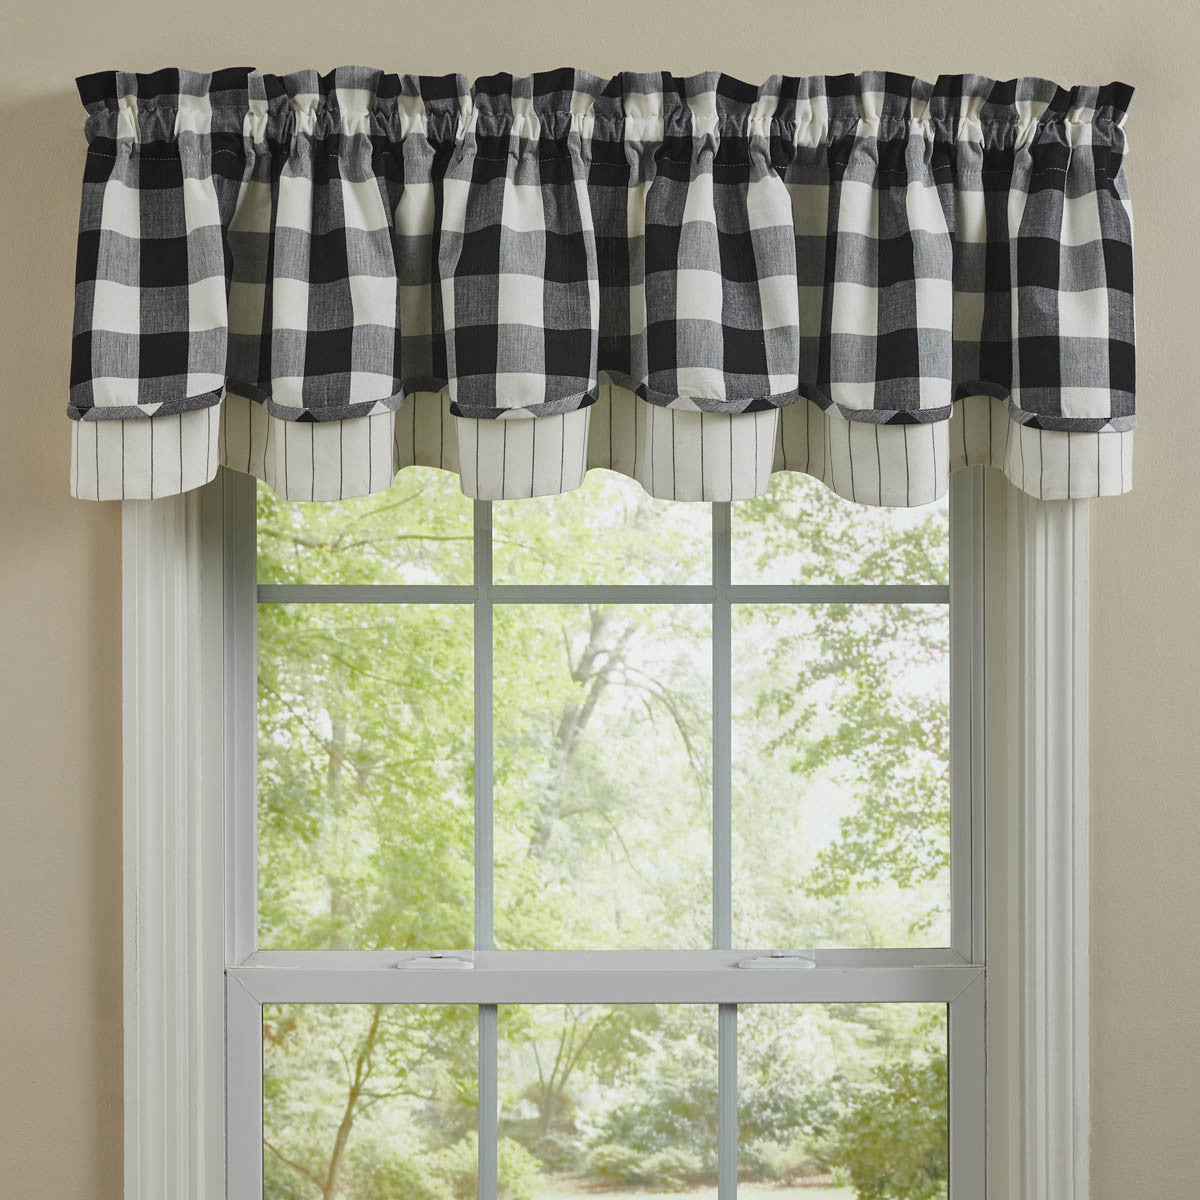 Wicklow Check Lined Layered Valance 16 Black And Cream Allysons Place